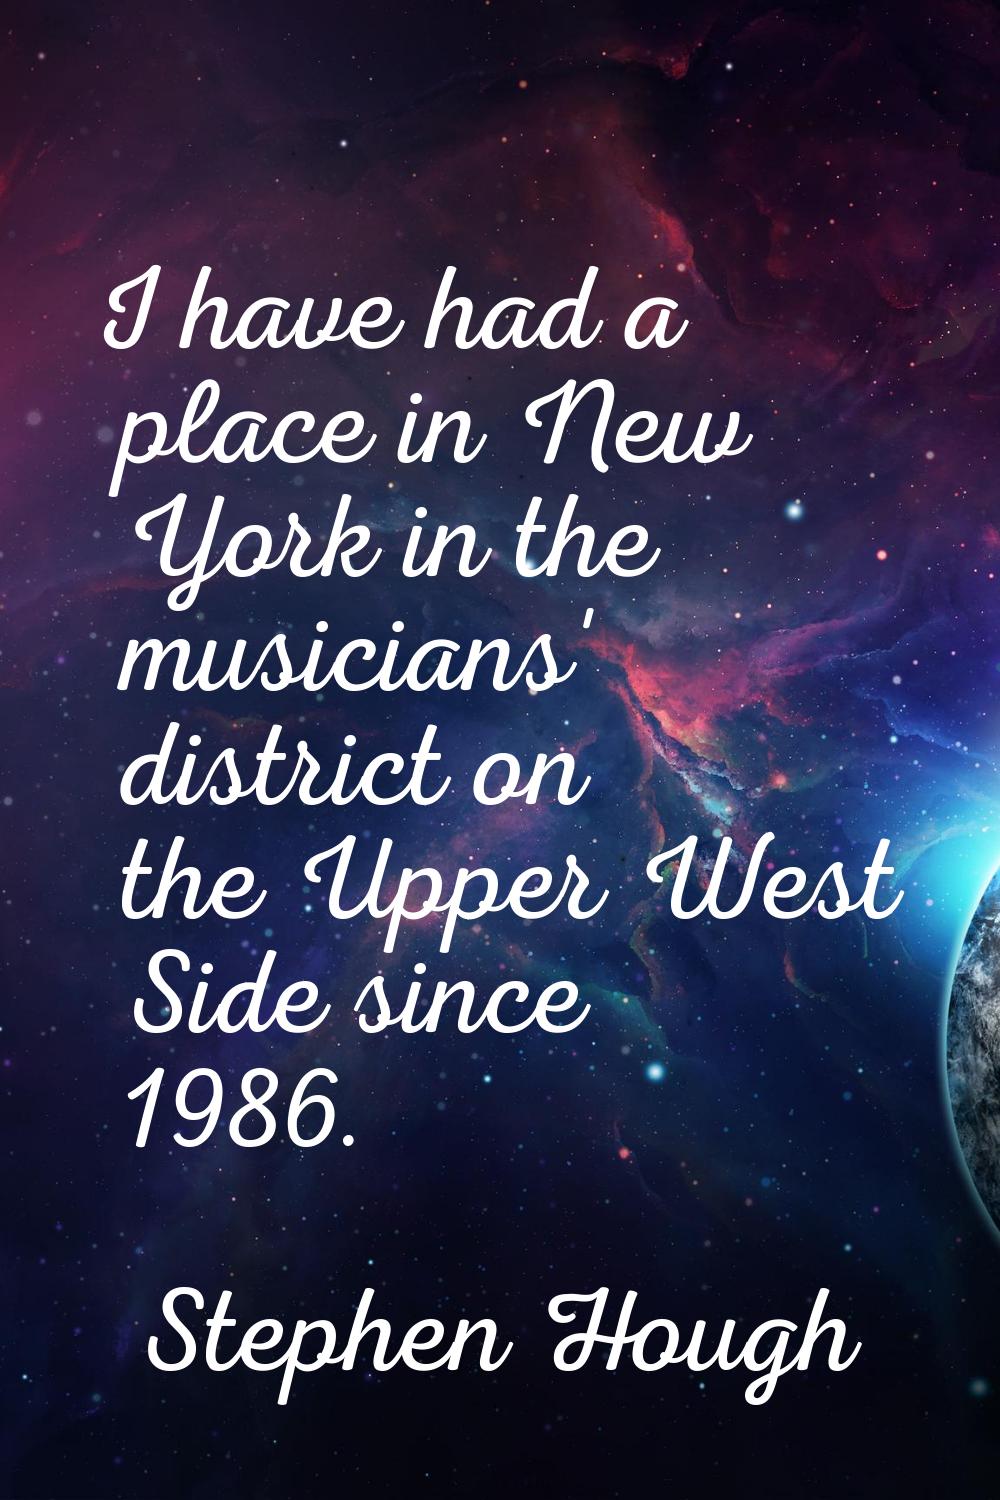 I have had a place in New York in the musicians' district on the Upper West Side since 1986.